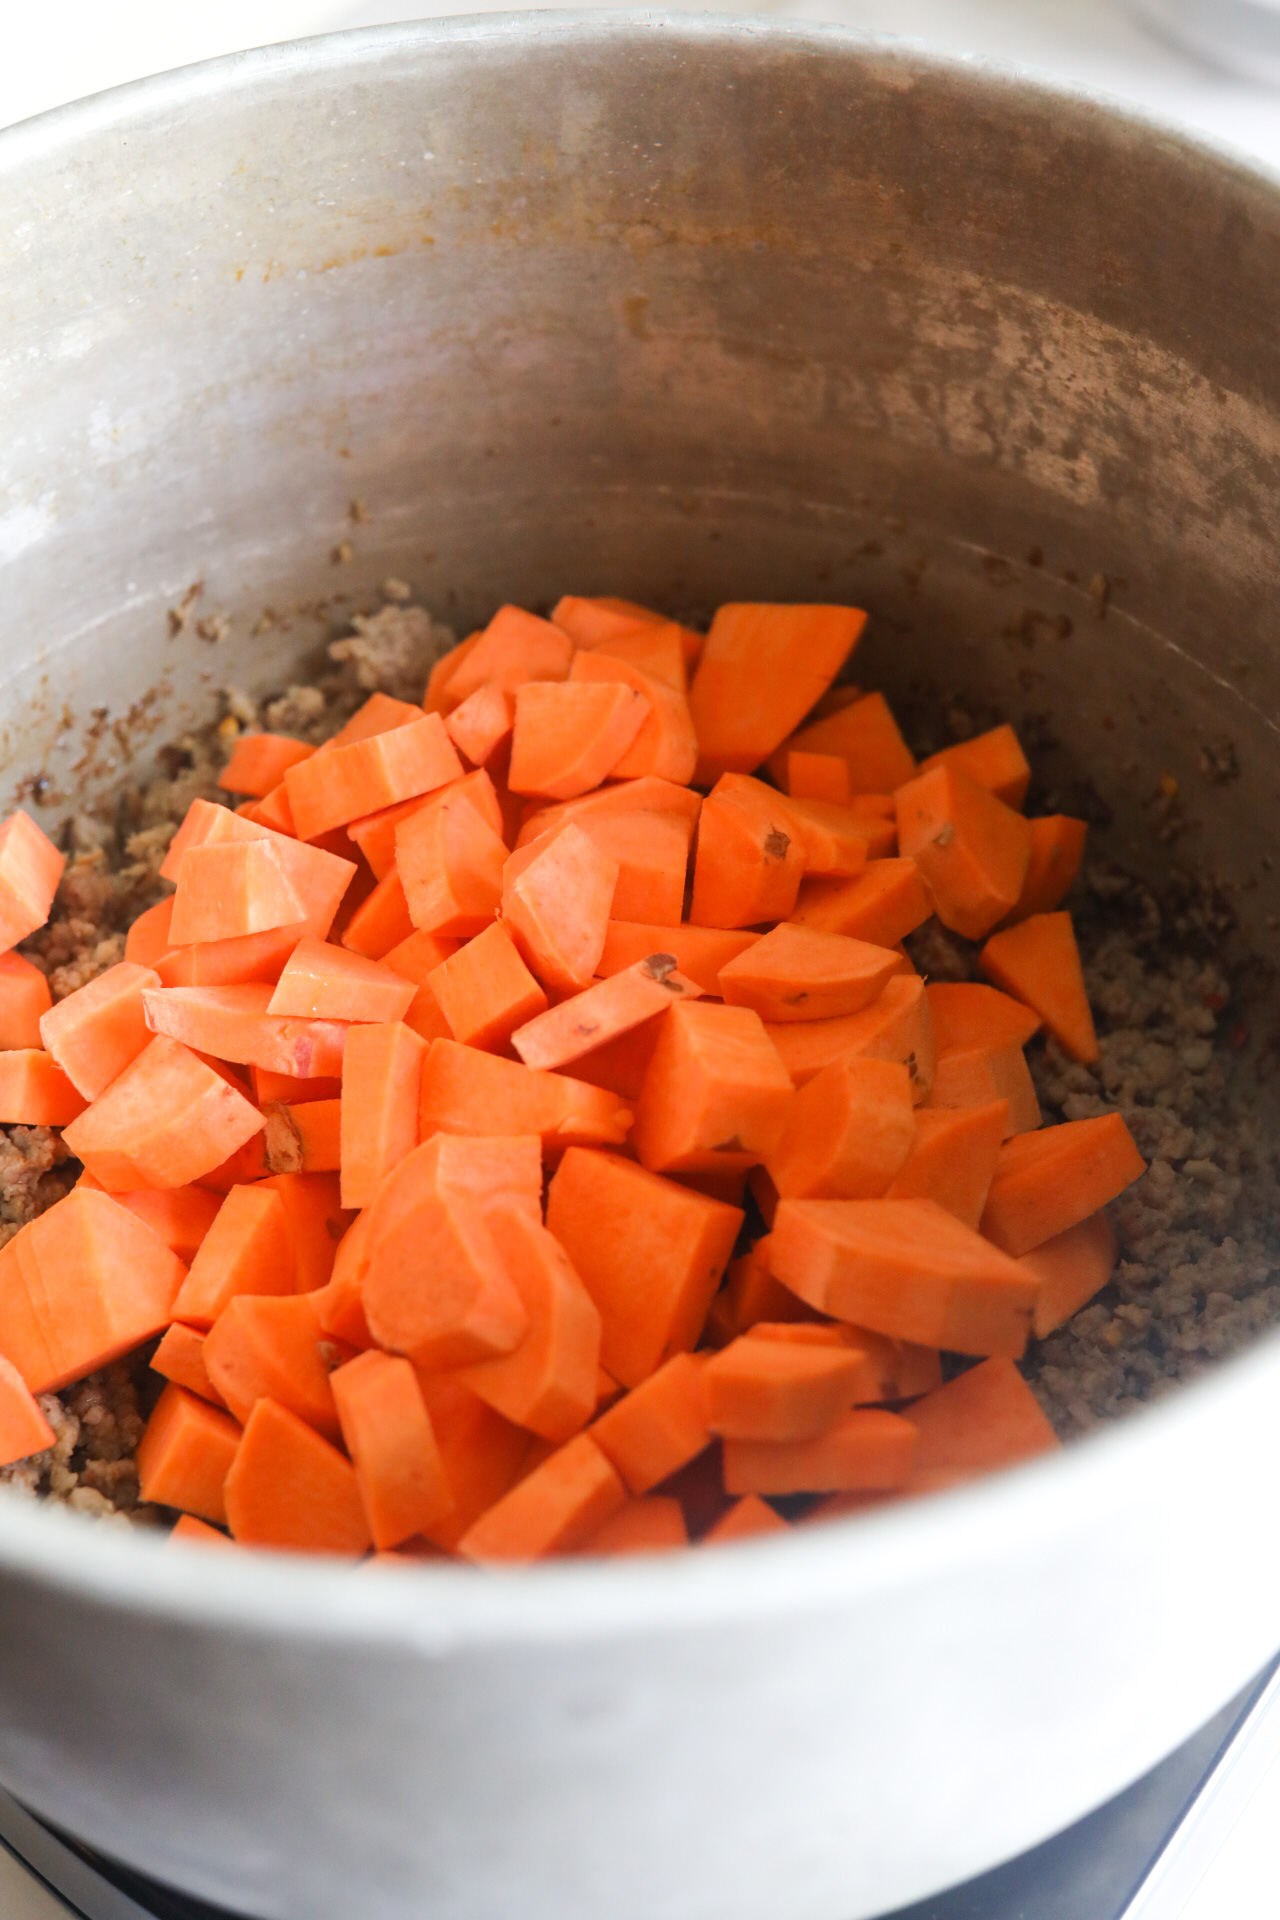 diced sweet potatoes added to the pot